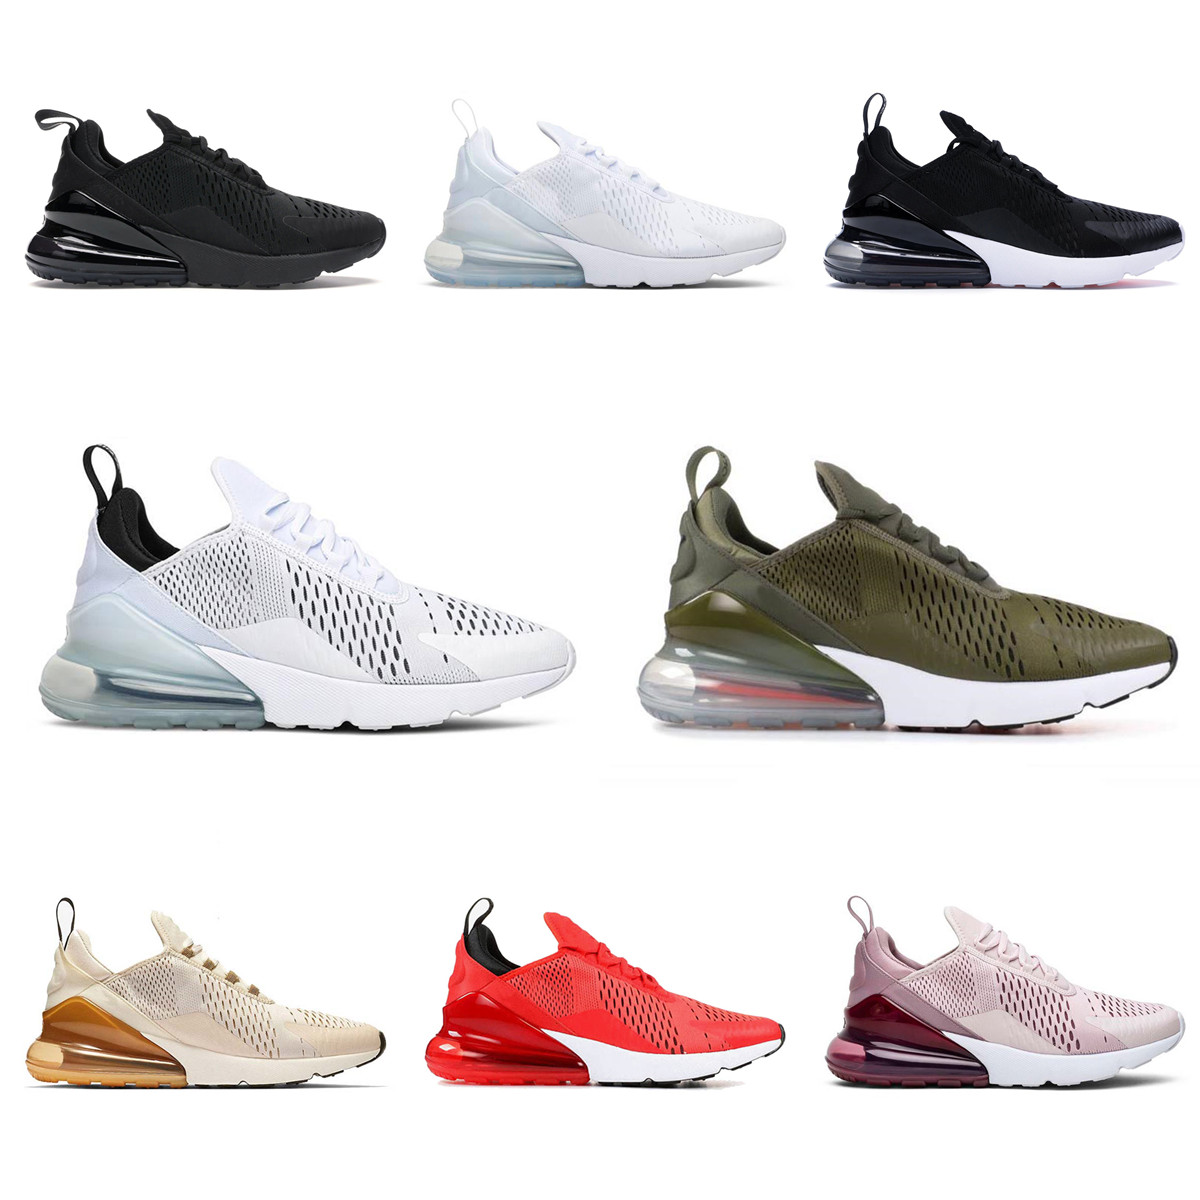 

270 Mens Women Running Sports Shoes Black Gold Triple White Guava Ice Barely Rose BE True Platinum Volt Dusty Cactus 27C Trainers Sneakers, Please contact us